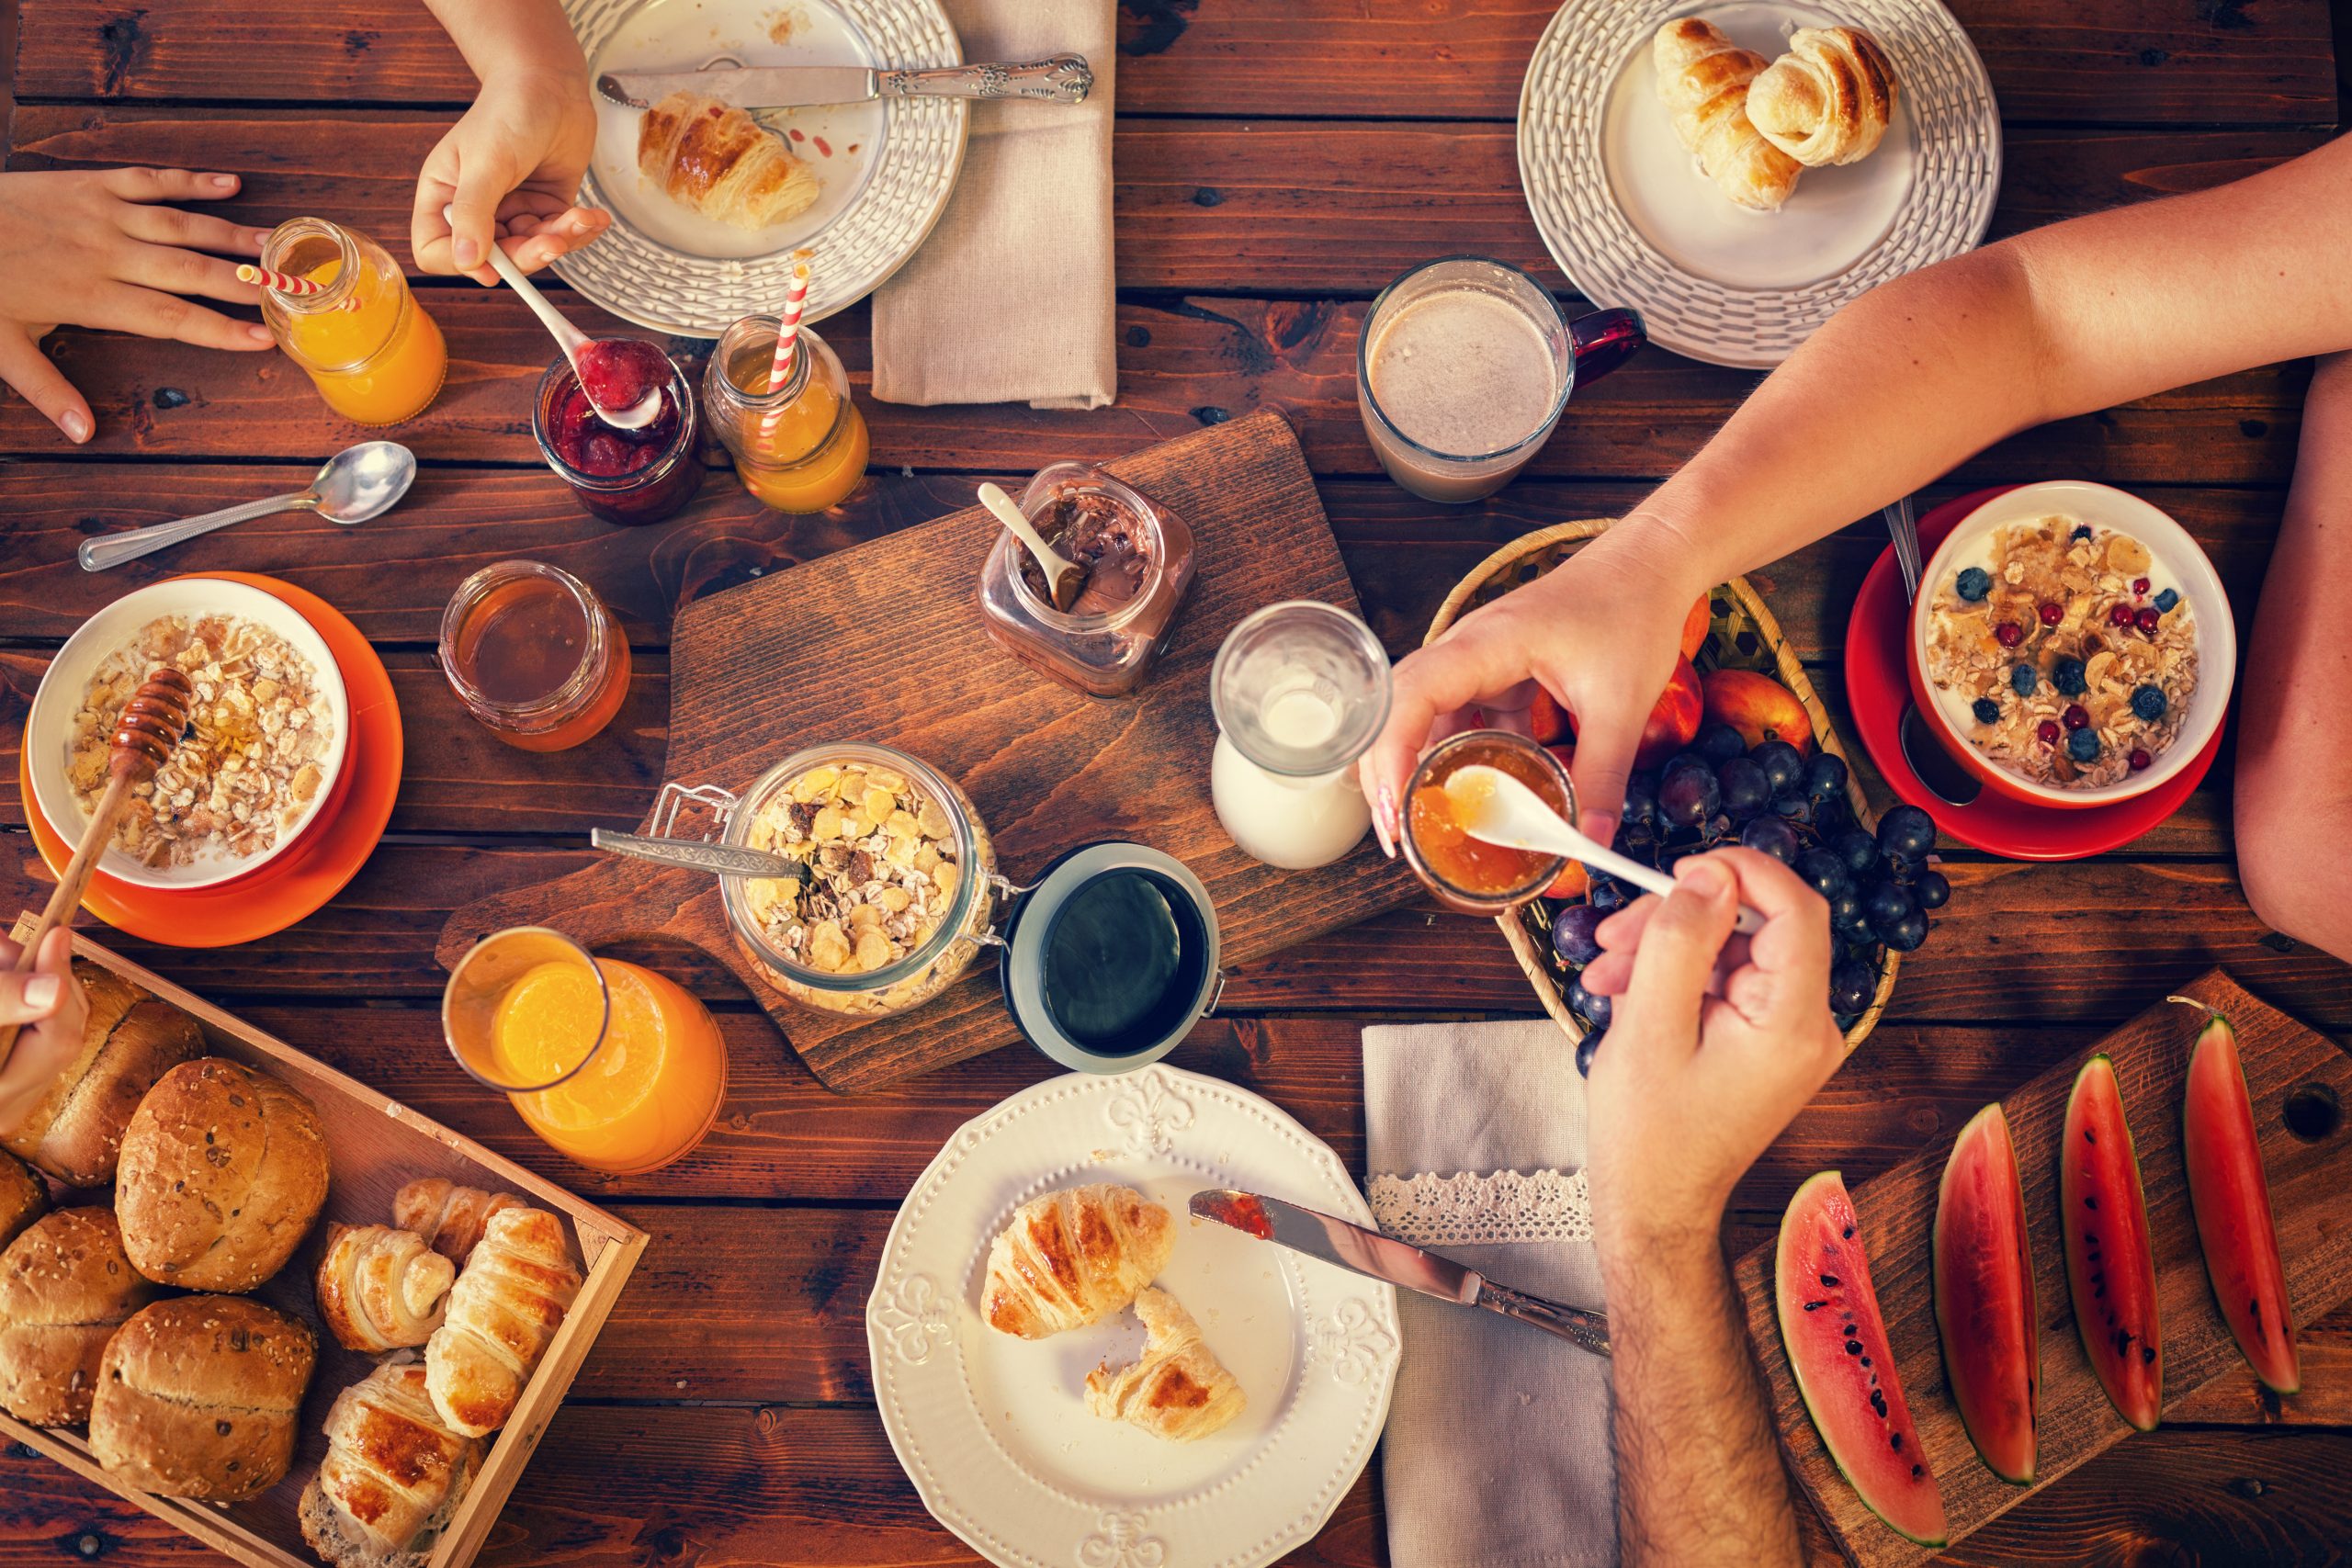 The 2022 big breakfast opportunity for healthy sales